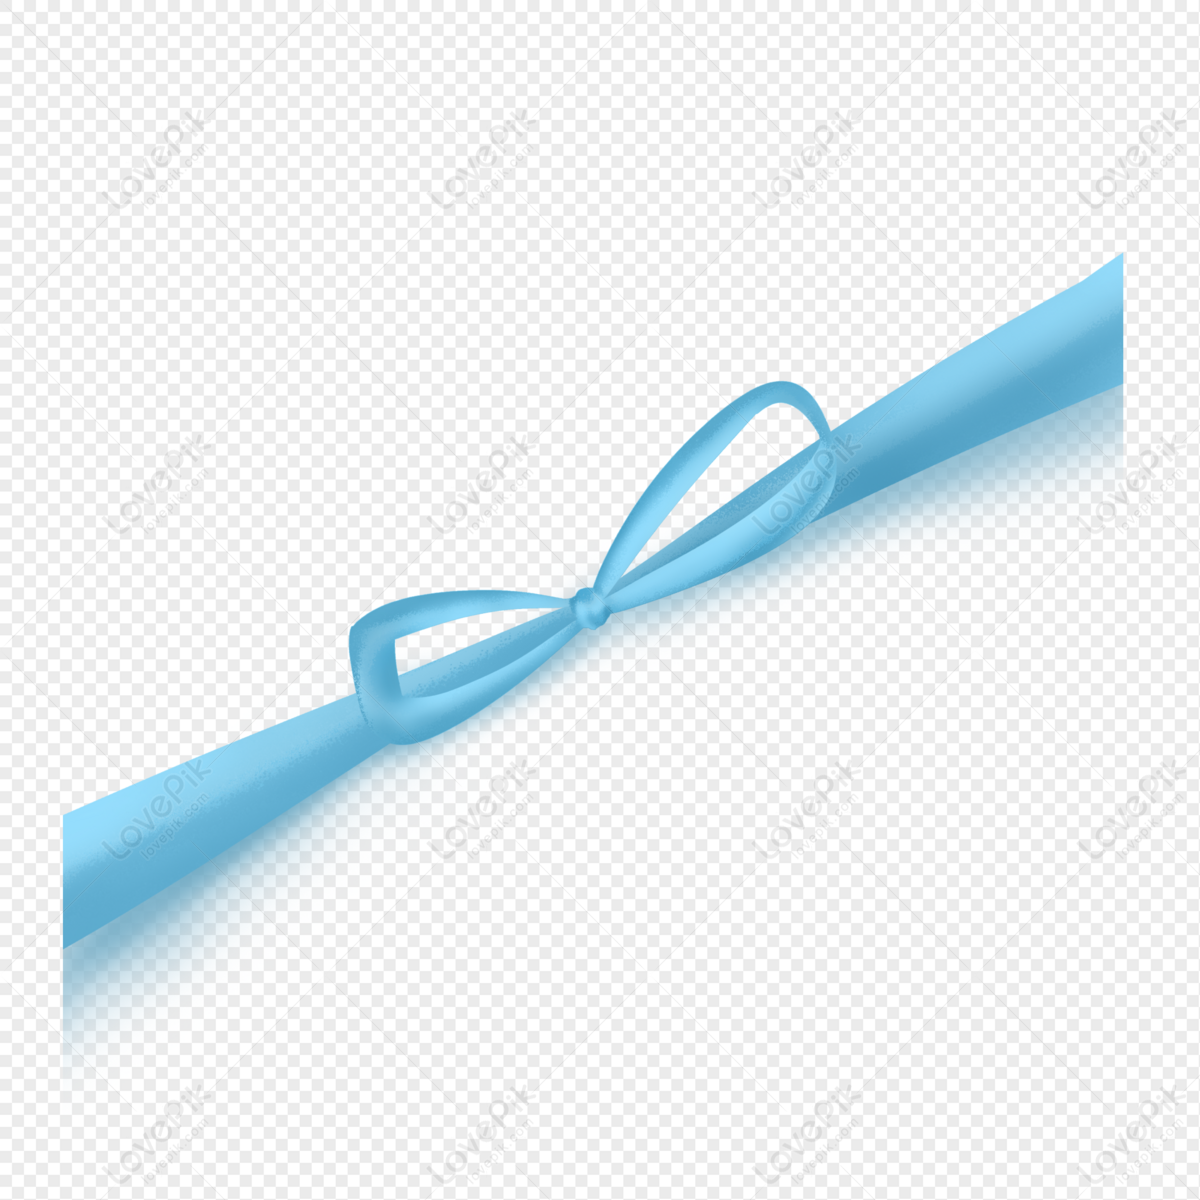 Light Green Small Fresh Ribbon, Light Vector, Ribbon Vector, Ribbon  Transparent PNG Hd Transparent Image And Clipart Image For Free Download -  Lovepik